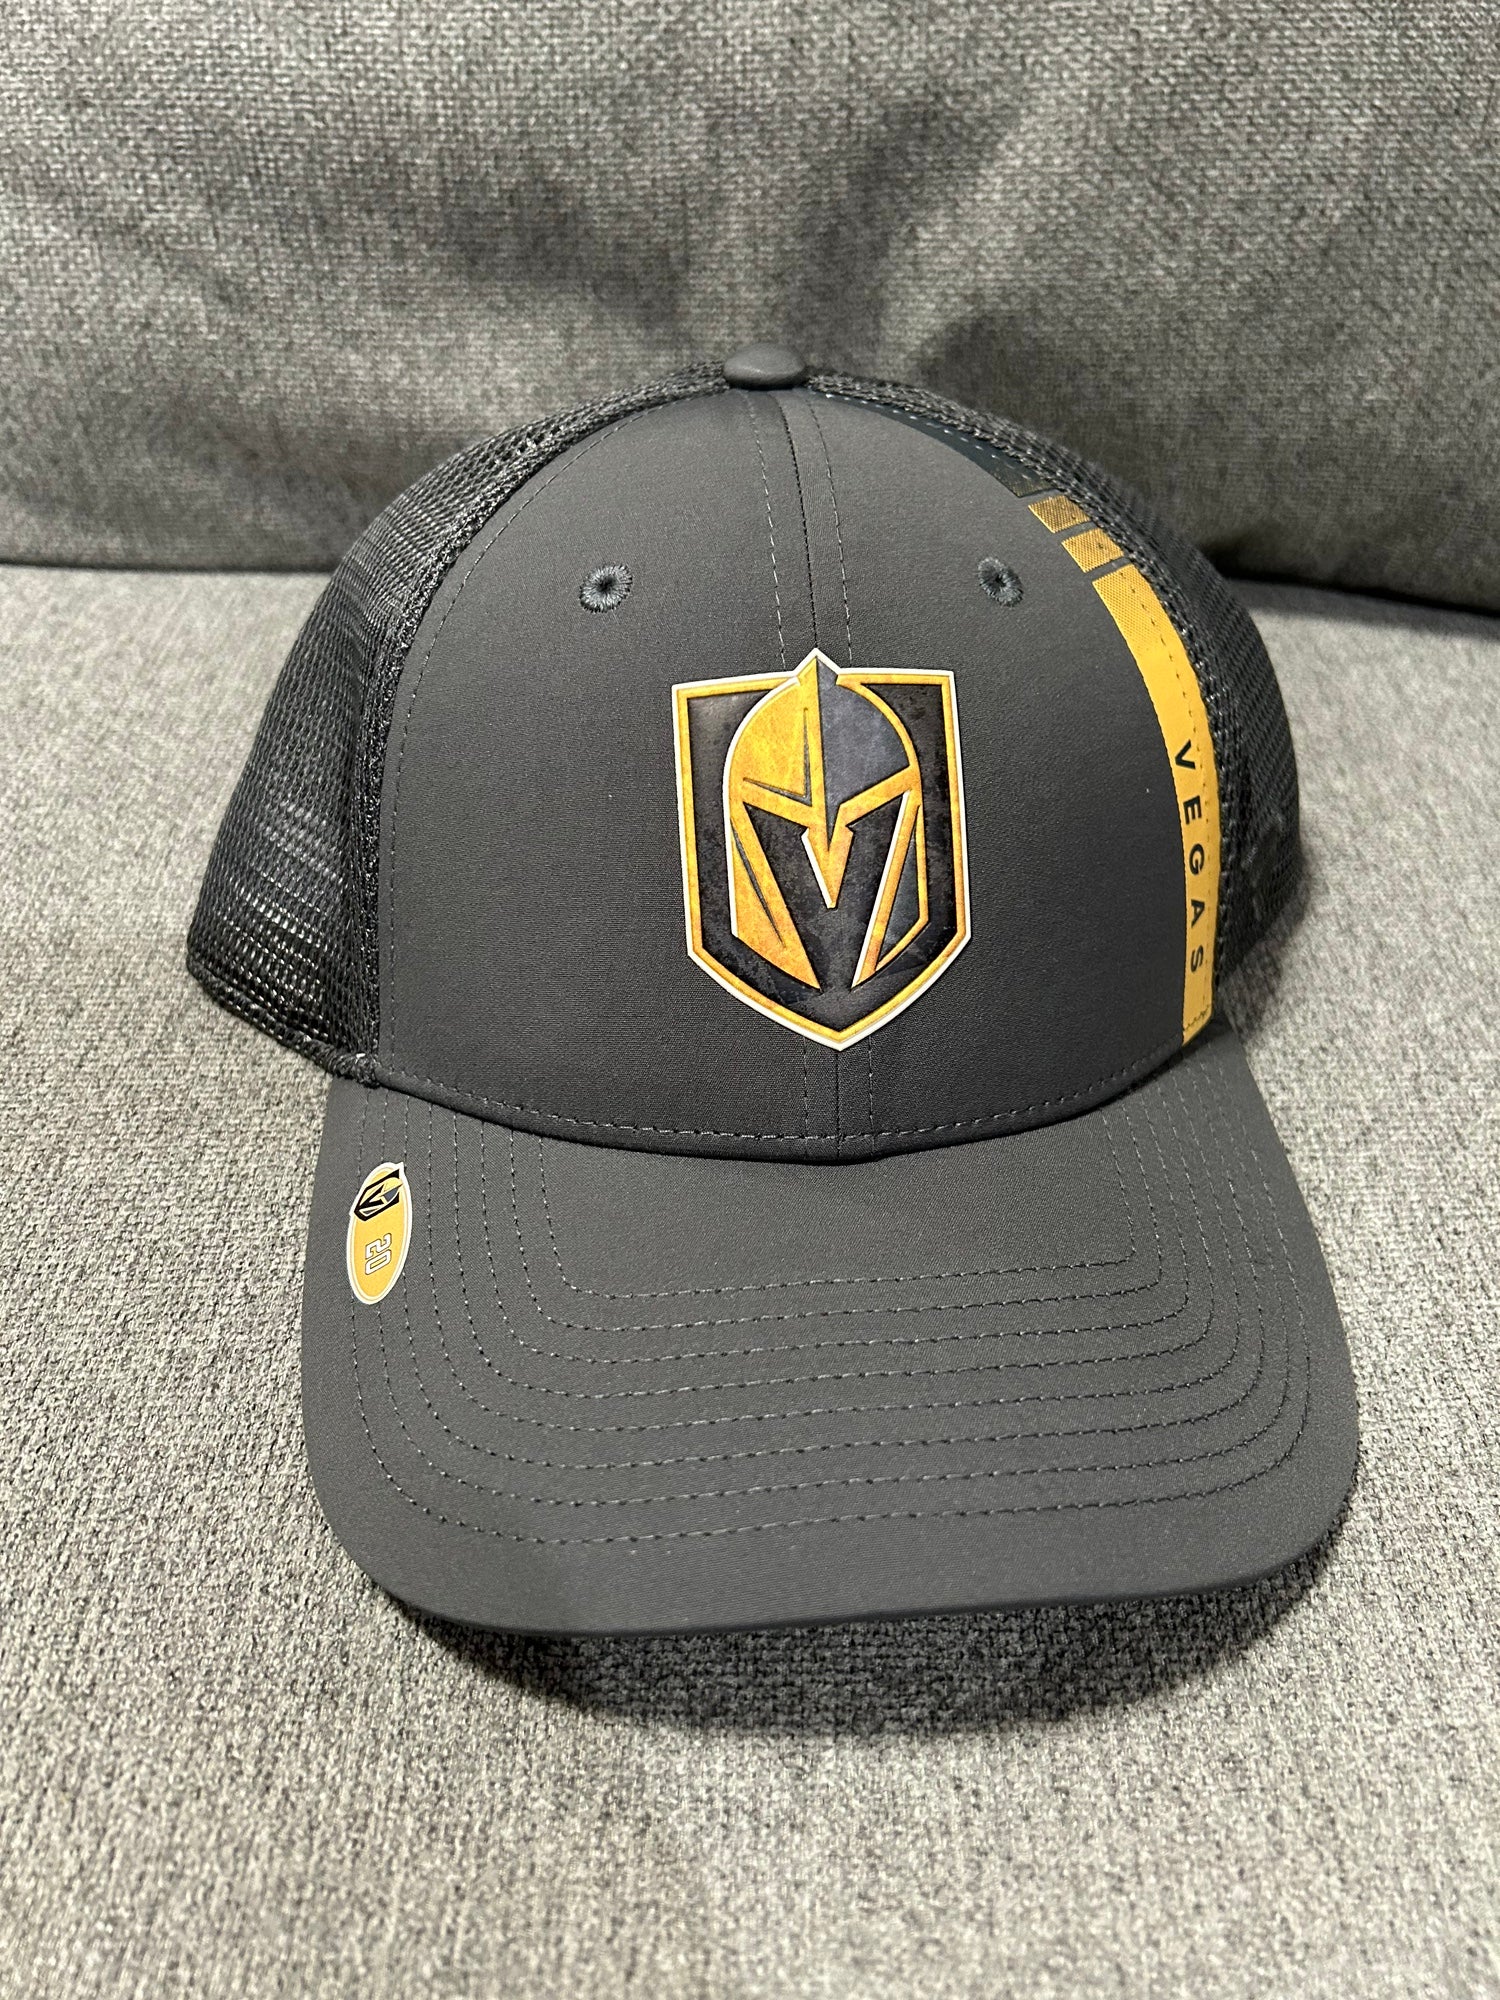 Vegas Golden Knights Gear on X: Tipping our hats to this guy for